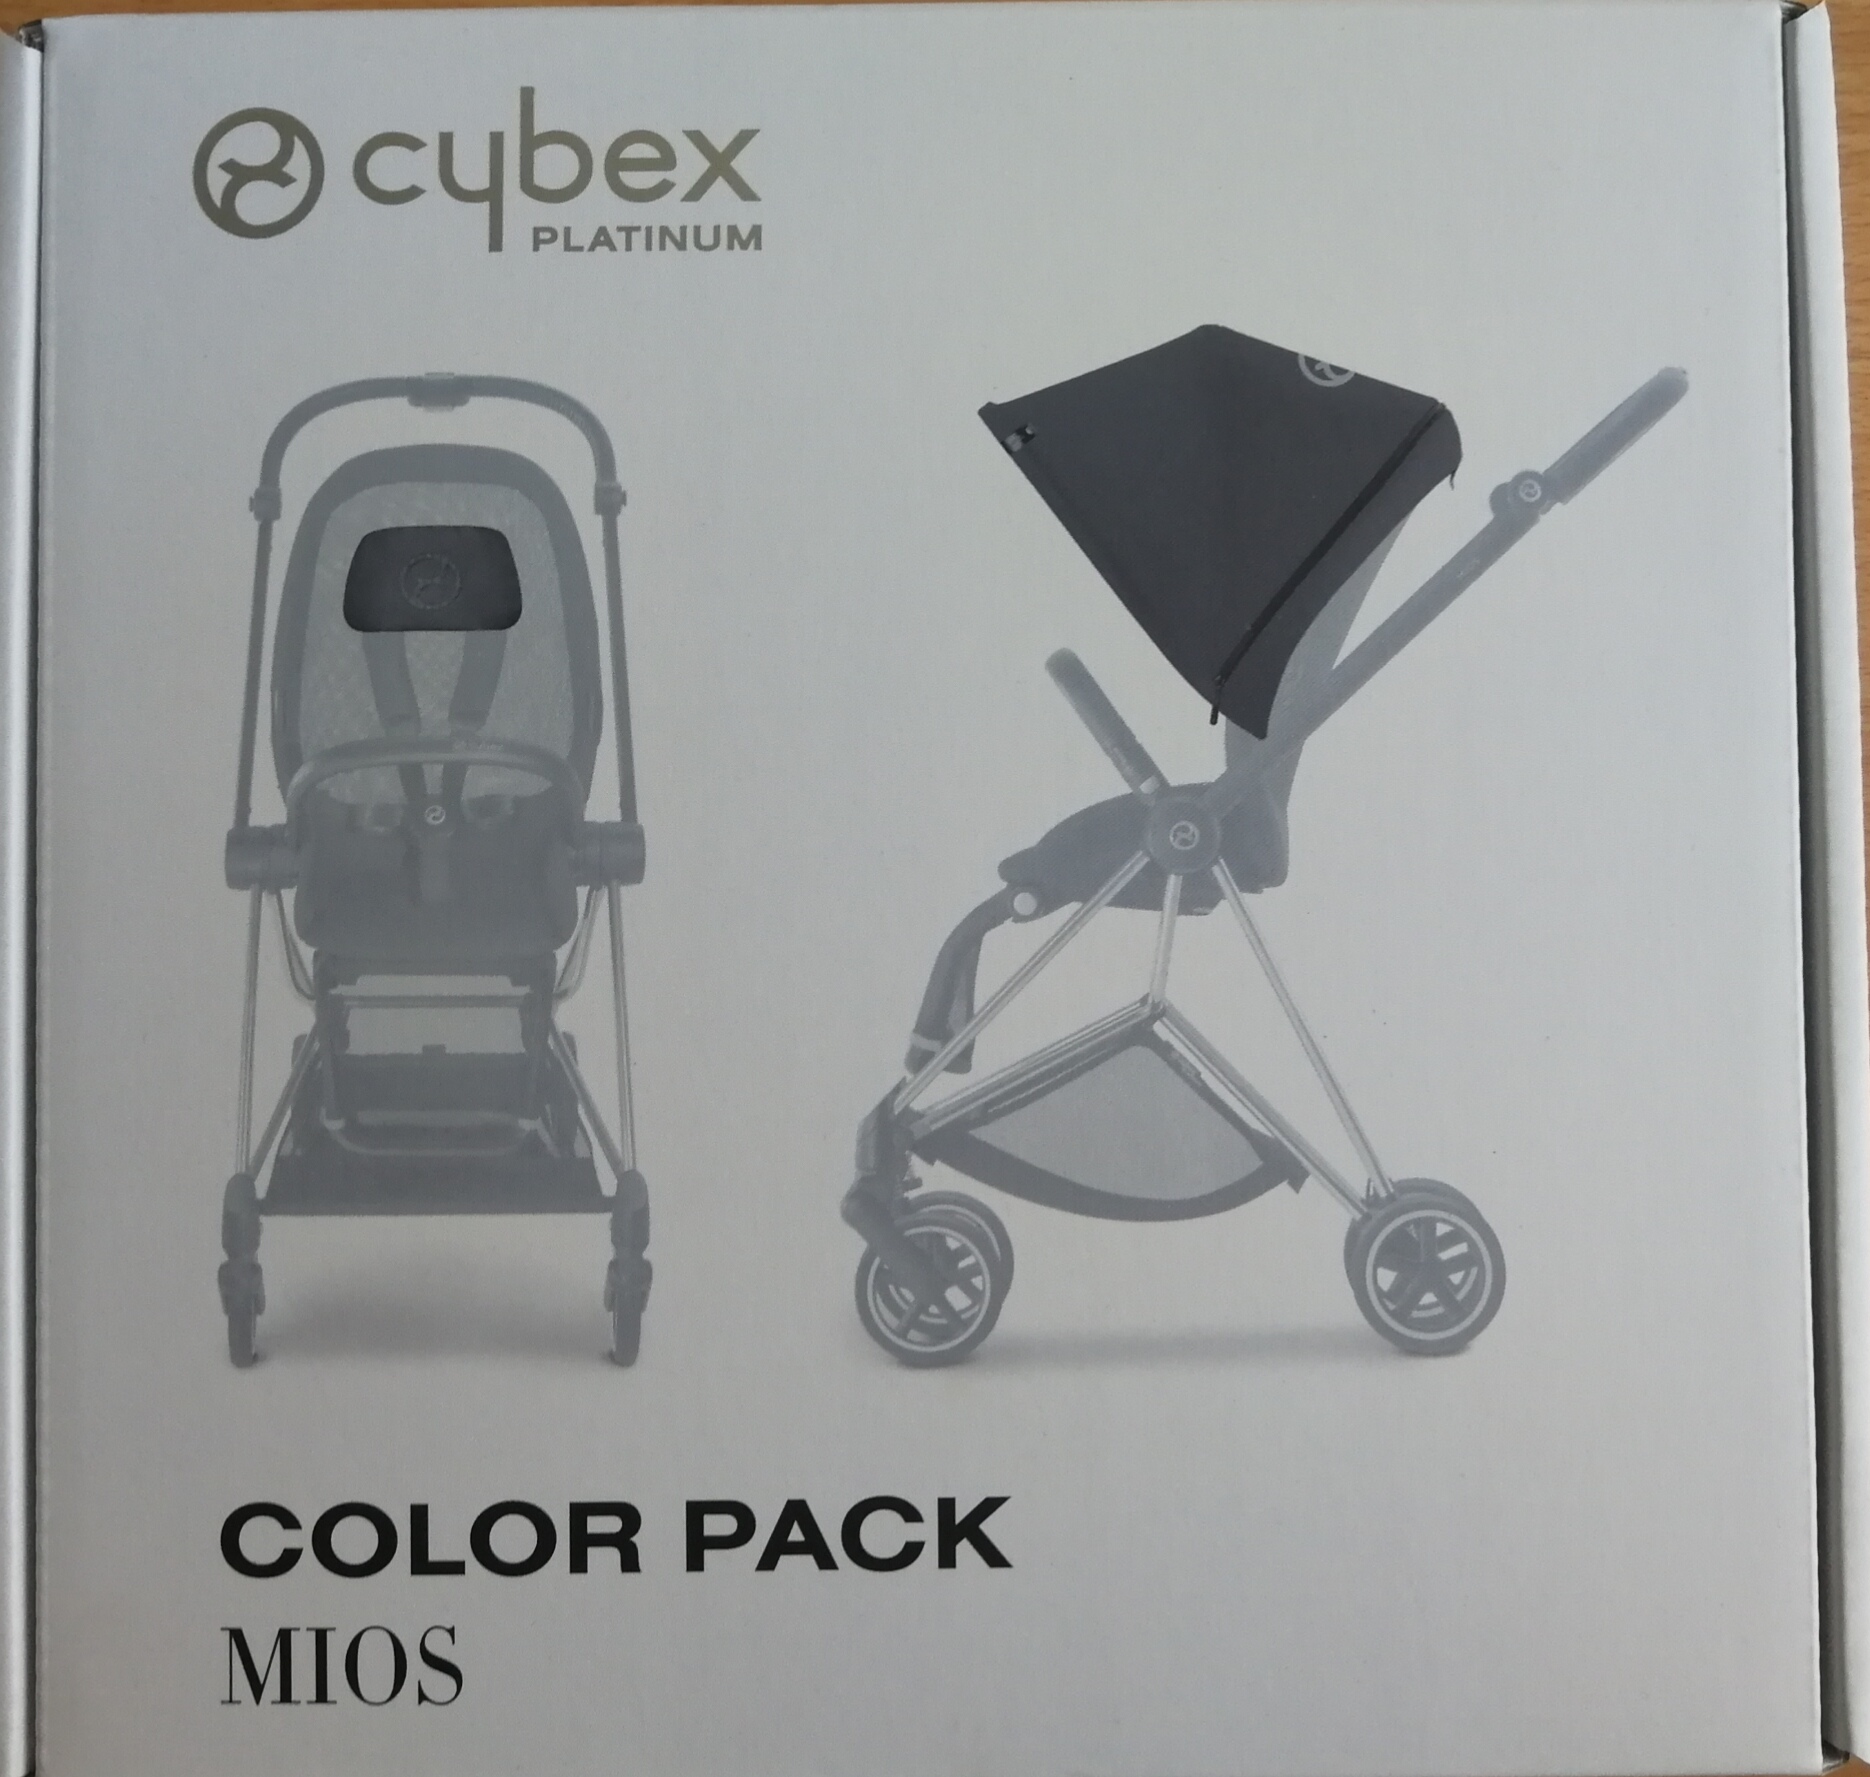 cybex mios color pack